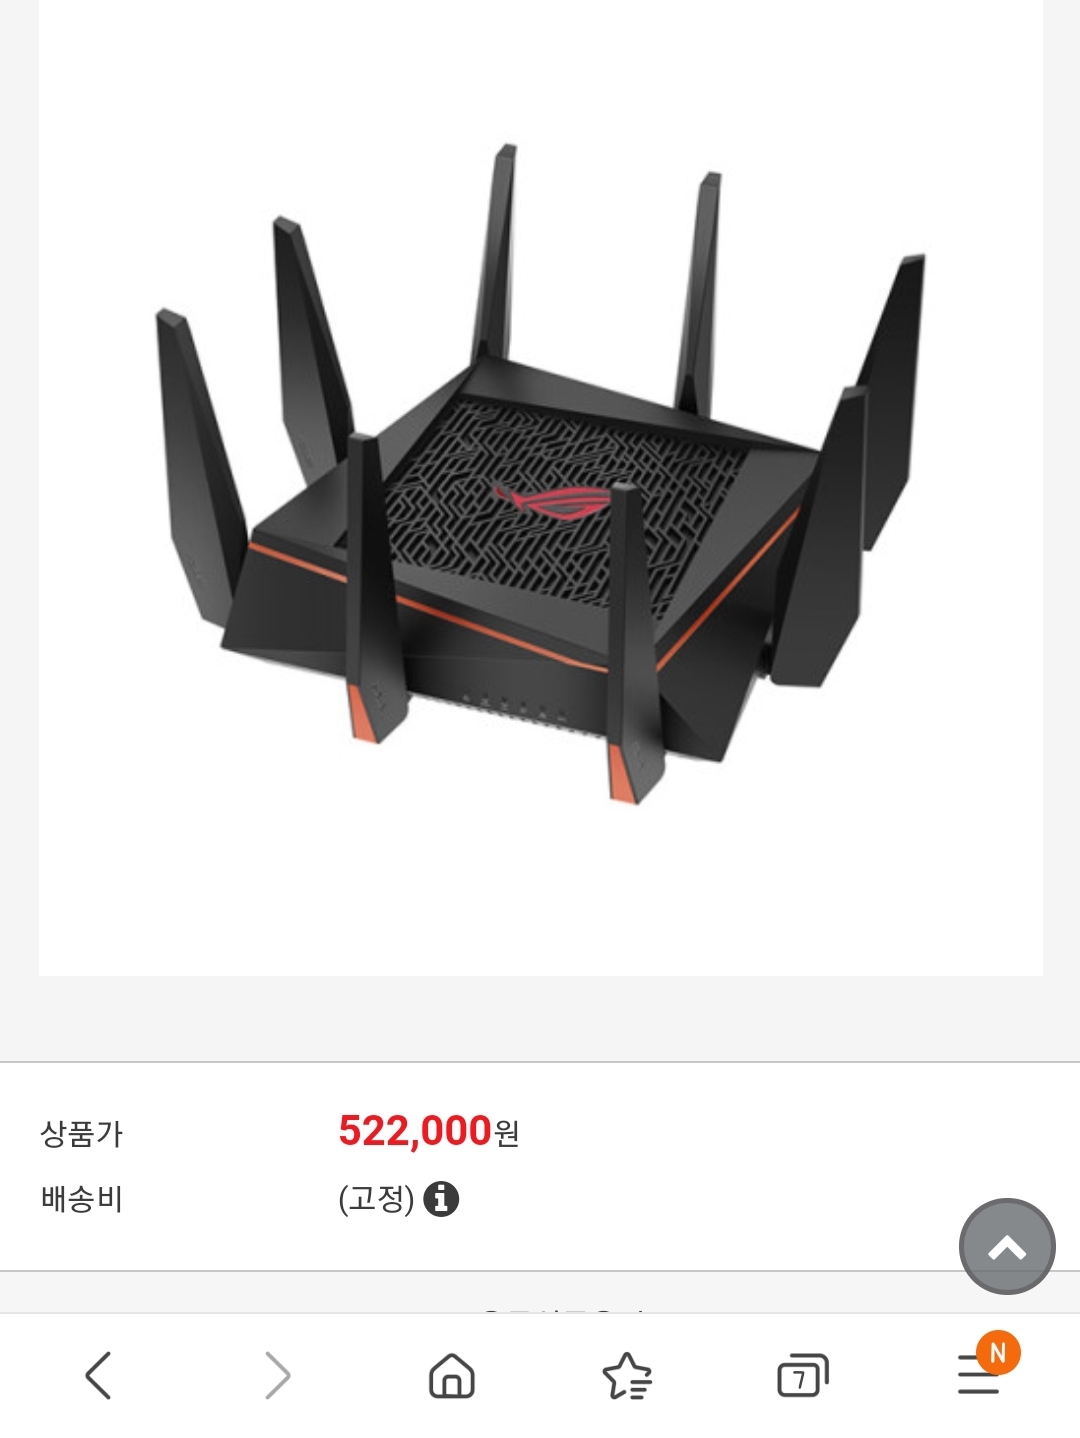 Router 코인